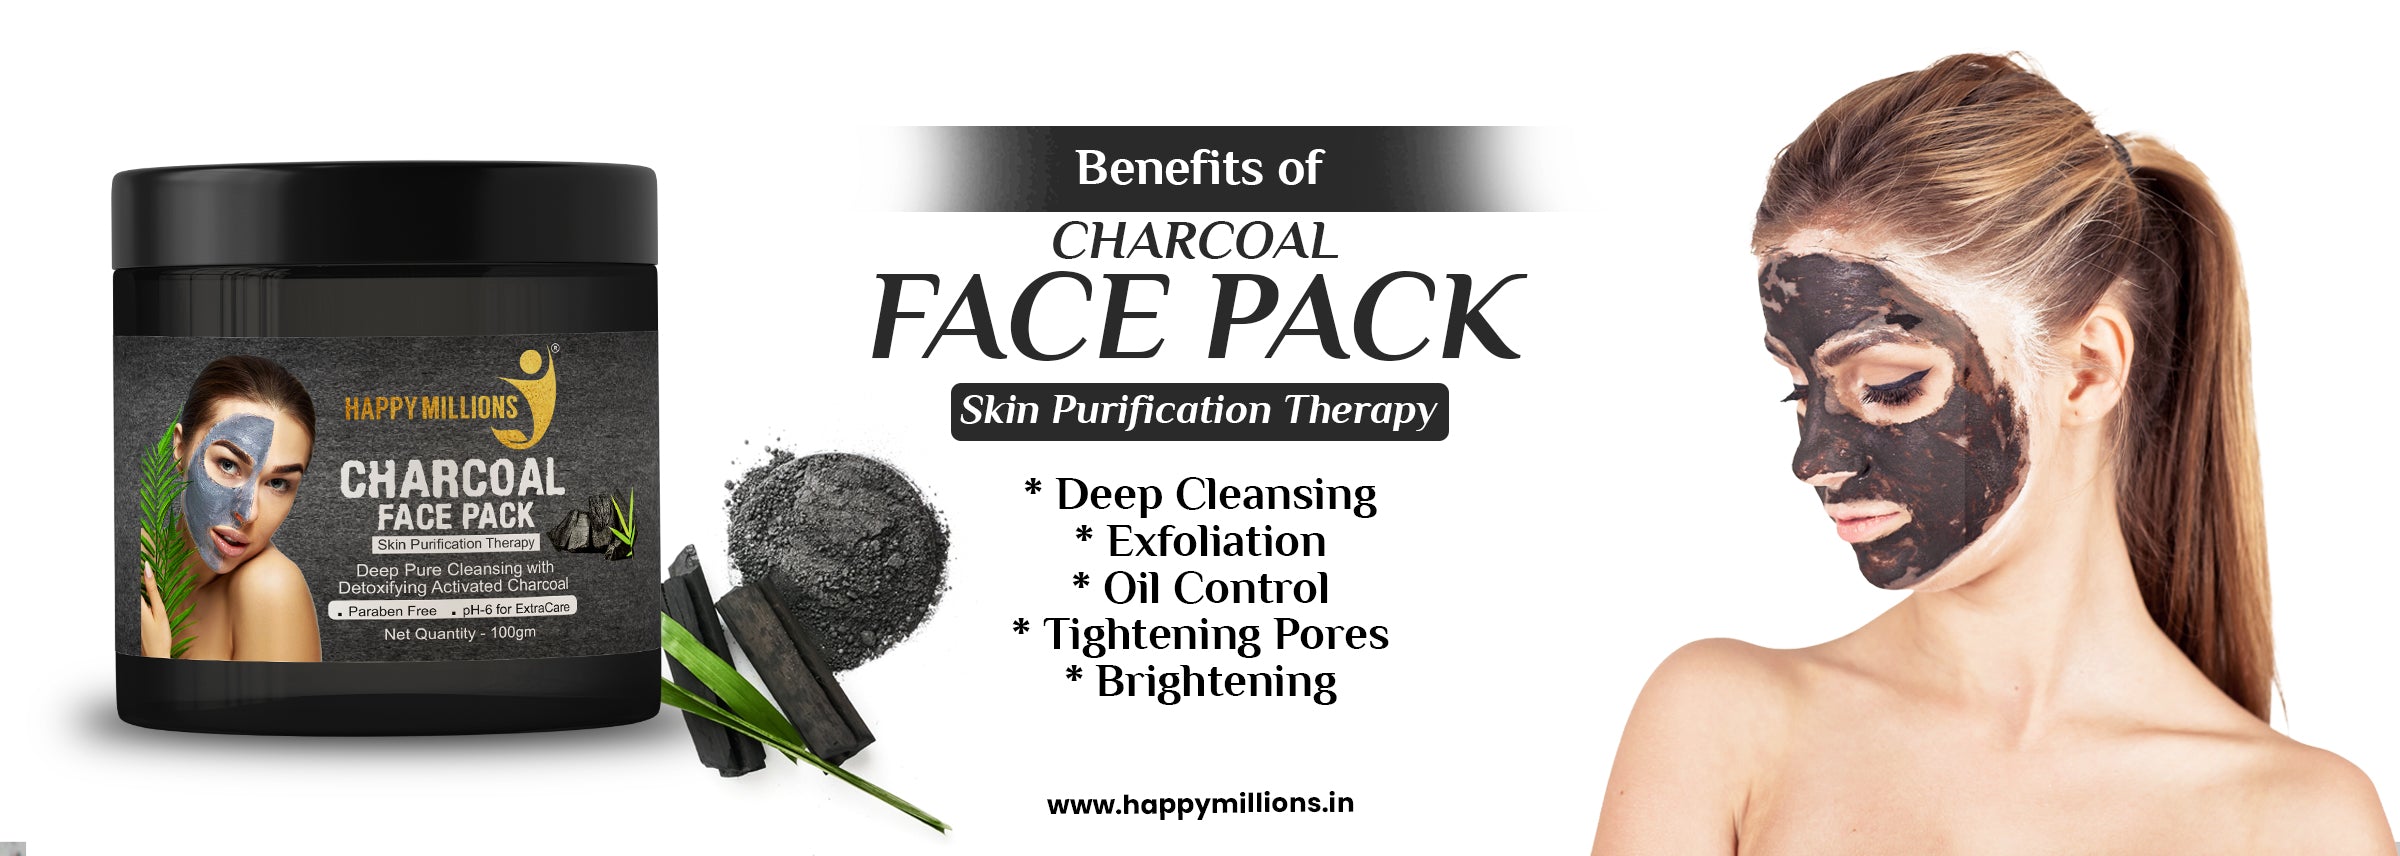 charcoal face pack for women